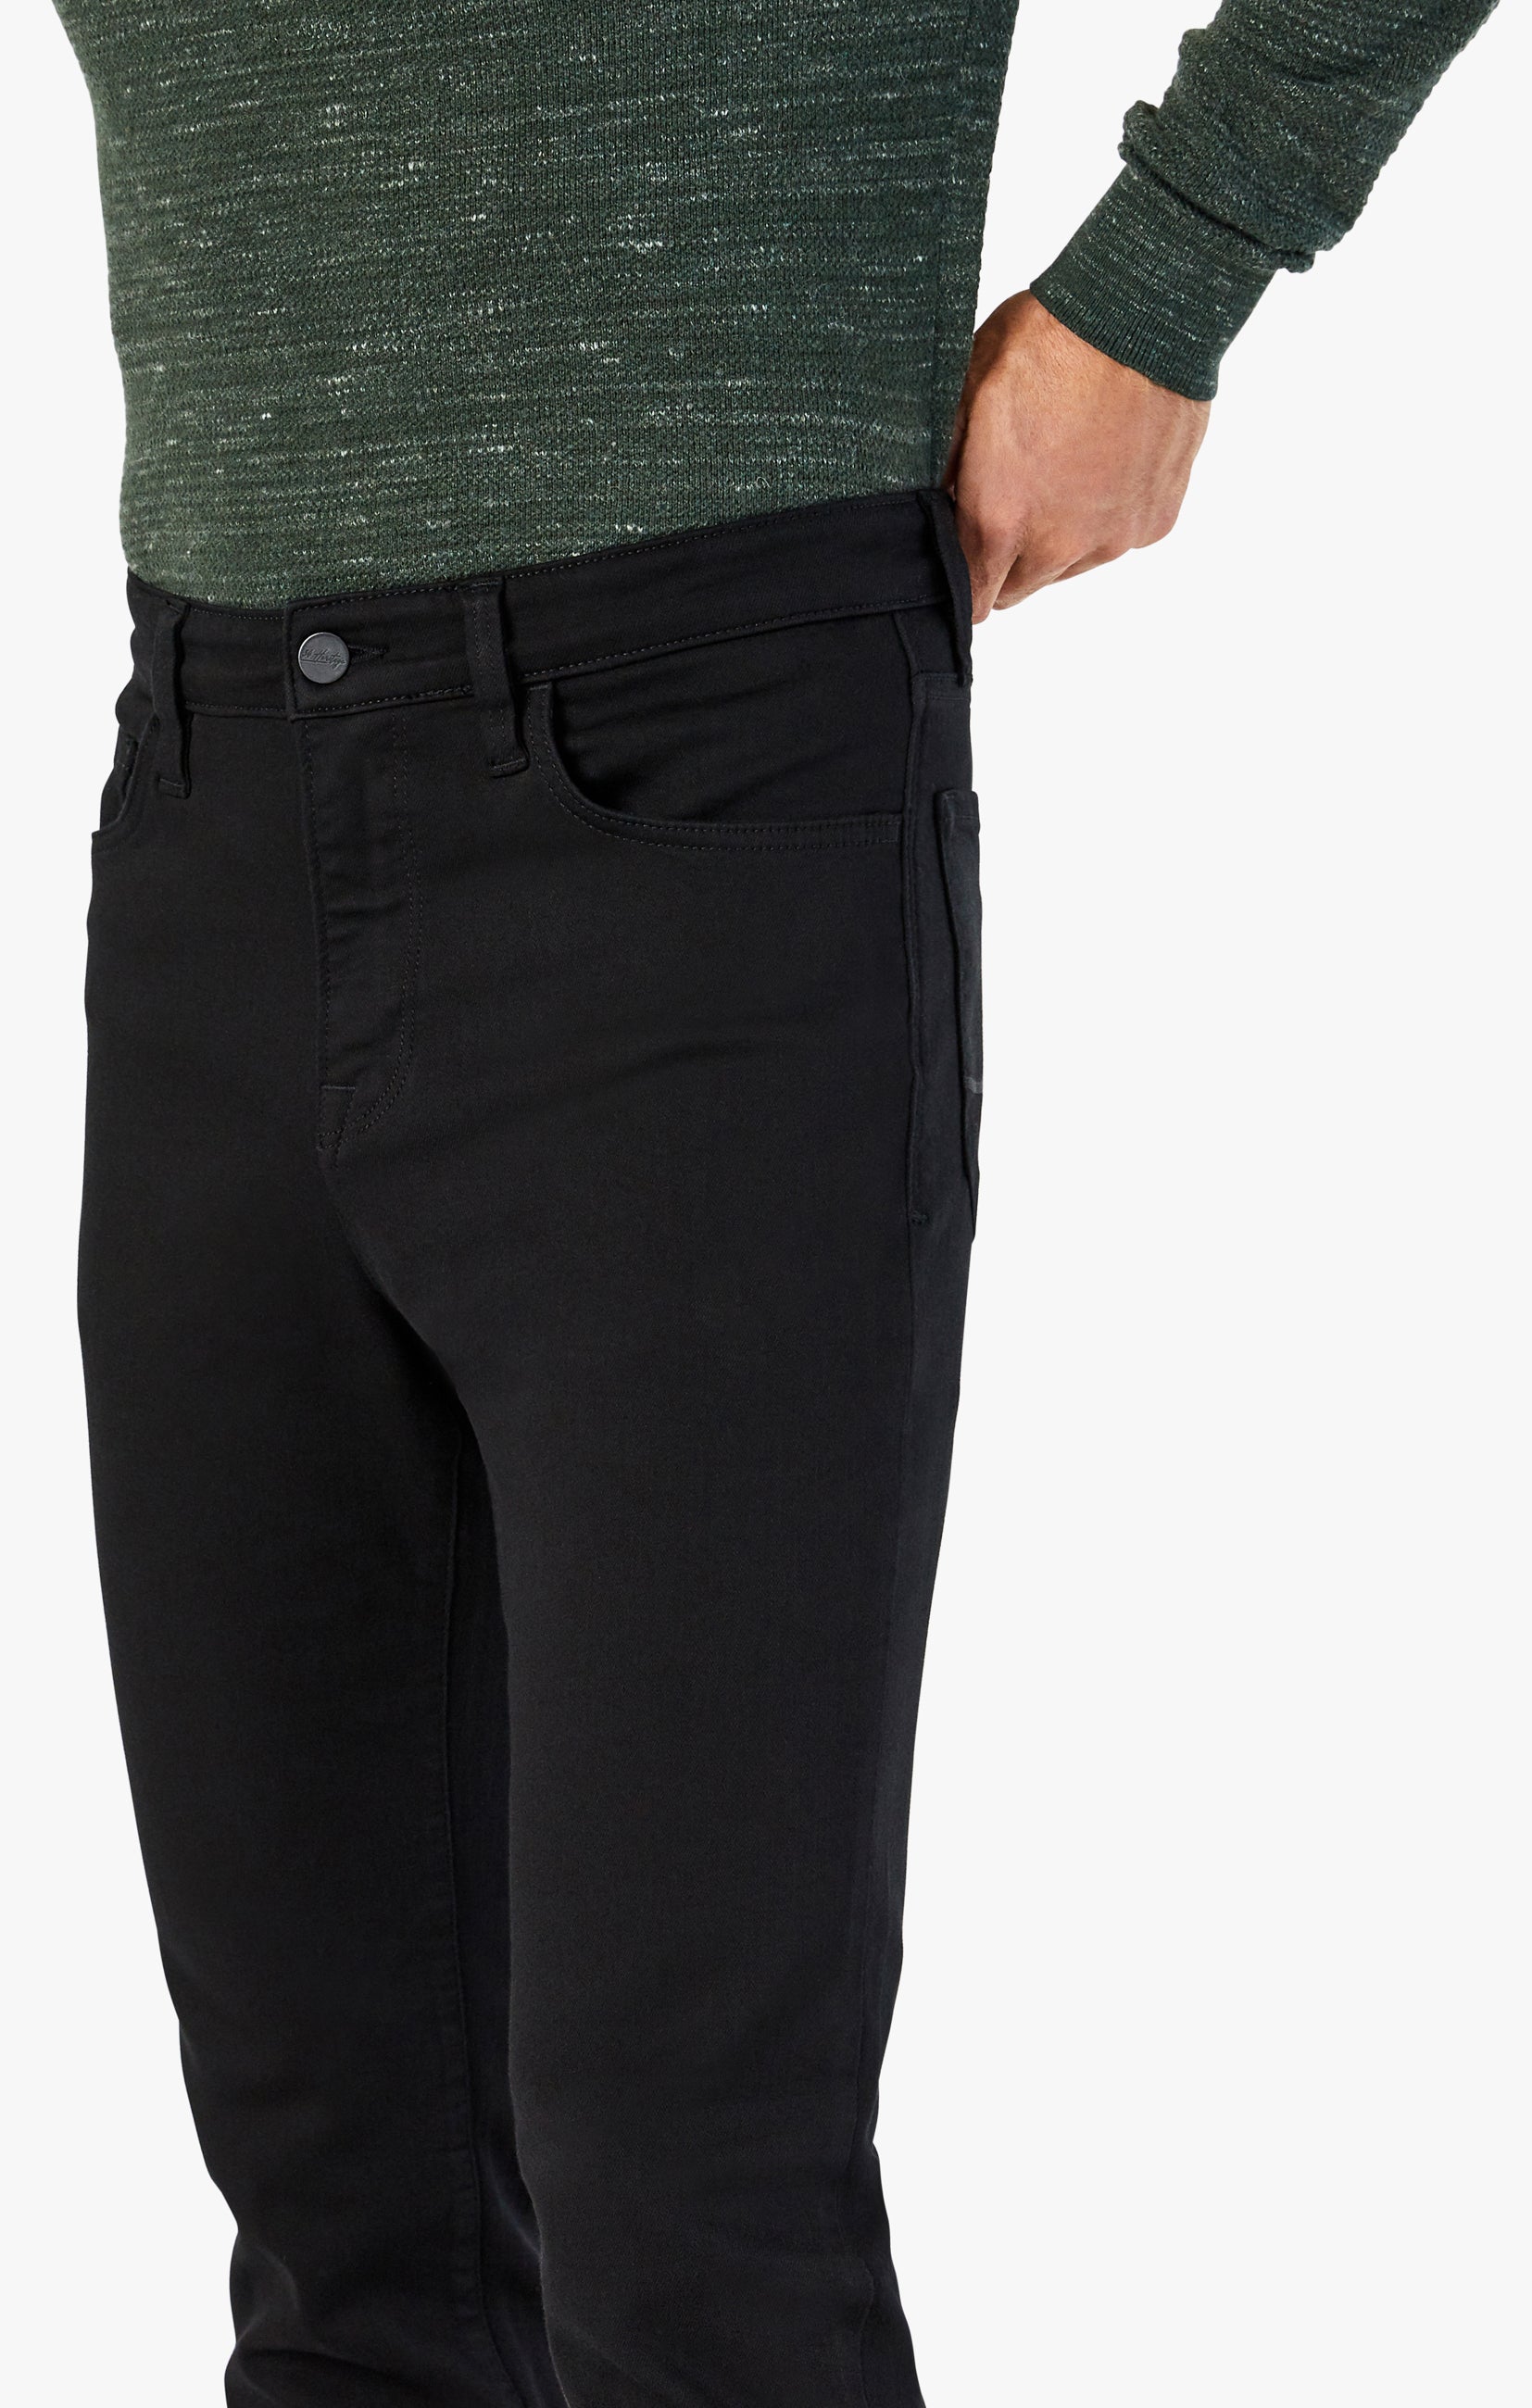 Champ Athletic Fit Jeans In Jet Black